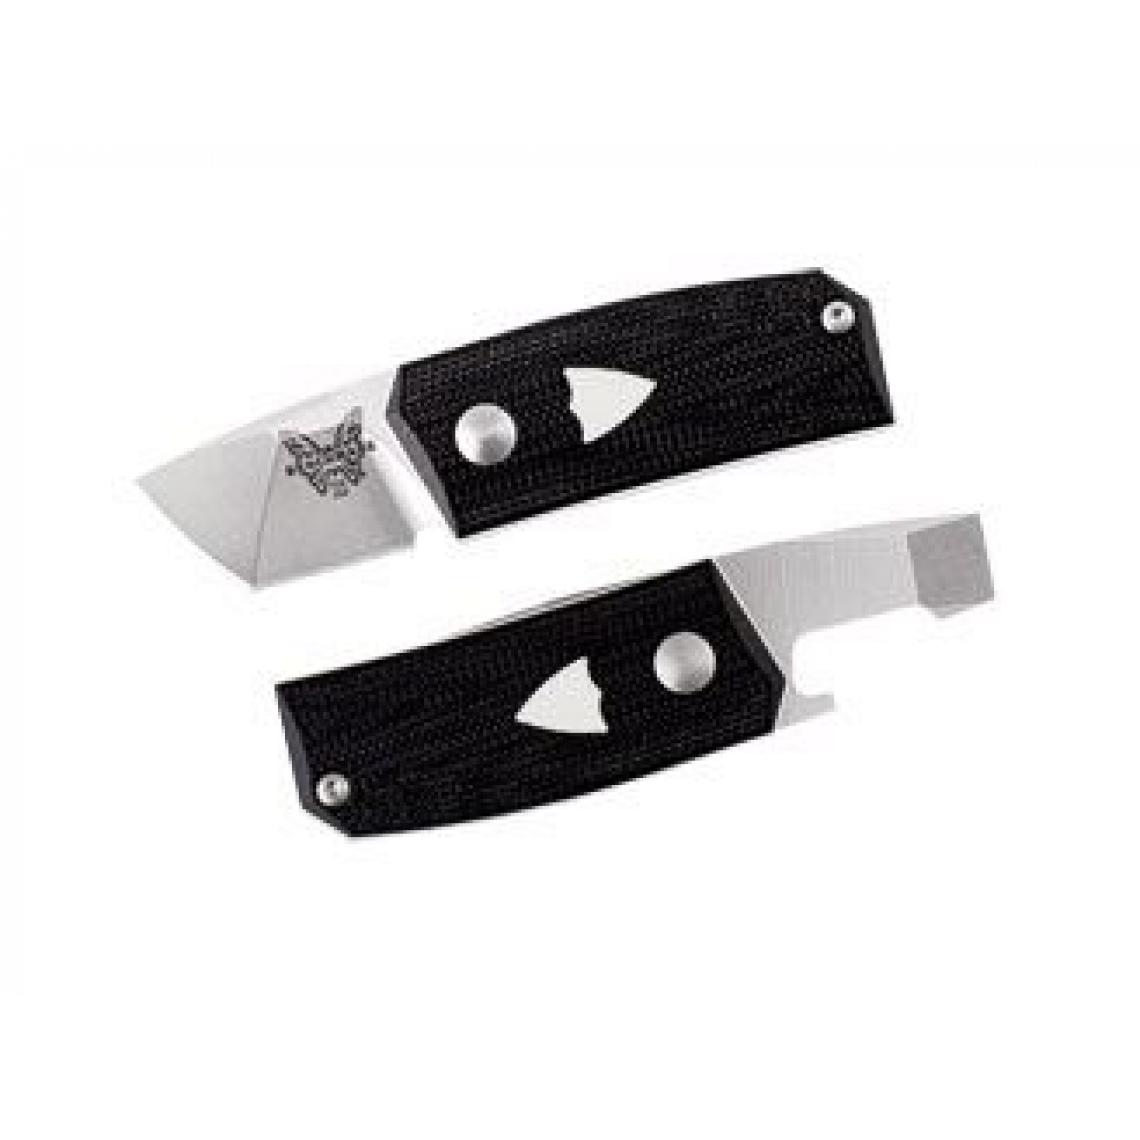 Divers Marques - Benchmade TENGU TOOL 602 - Outils de coupe